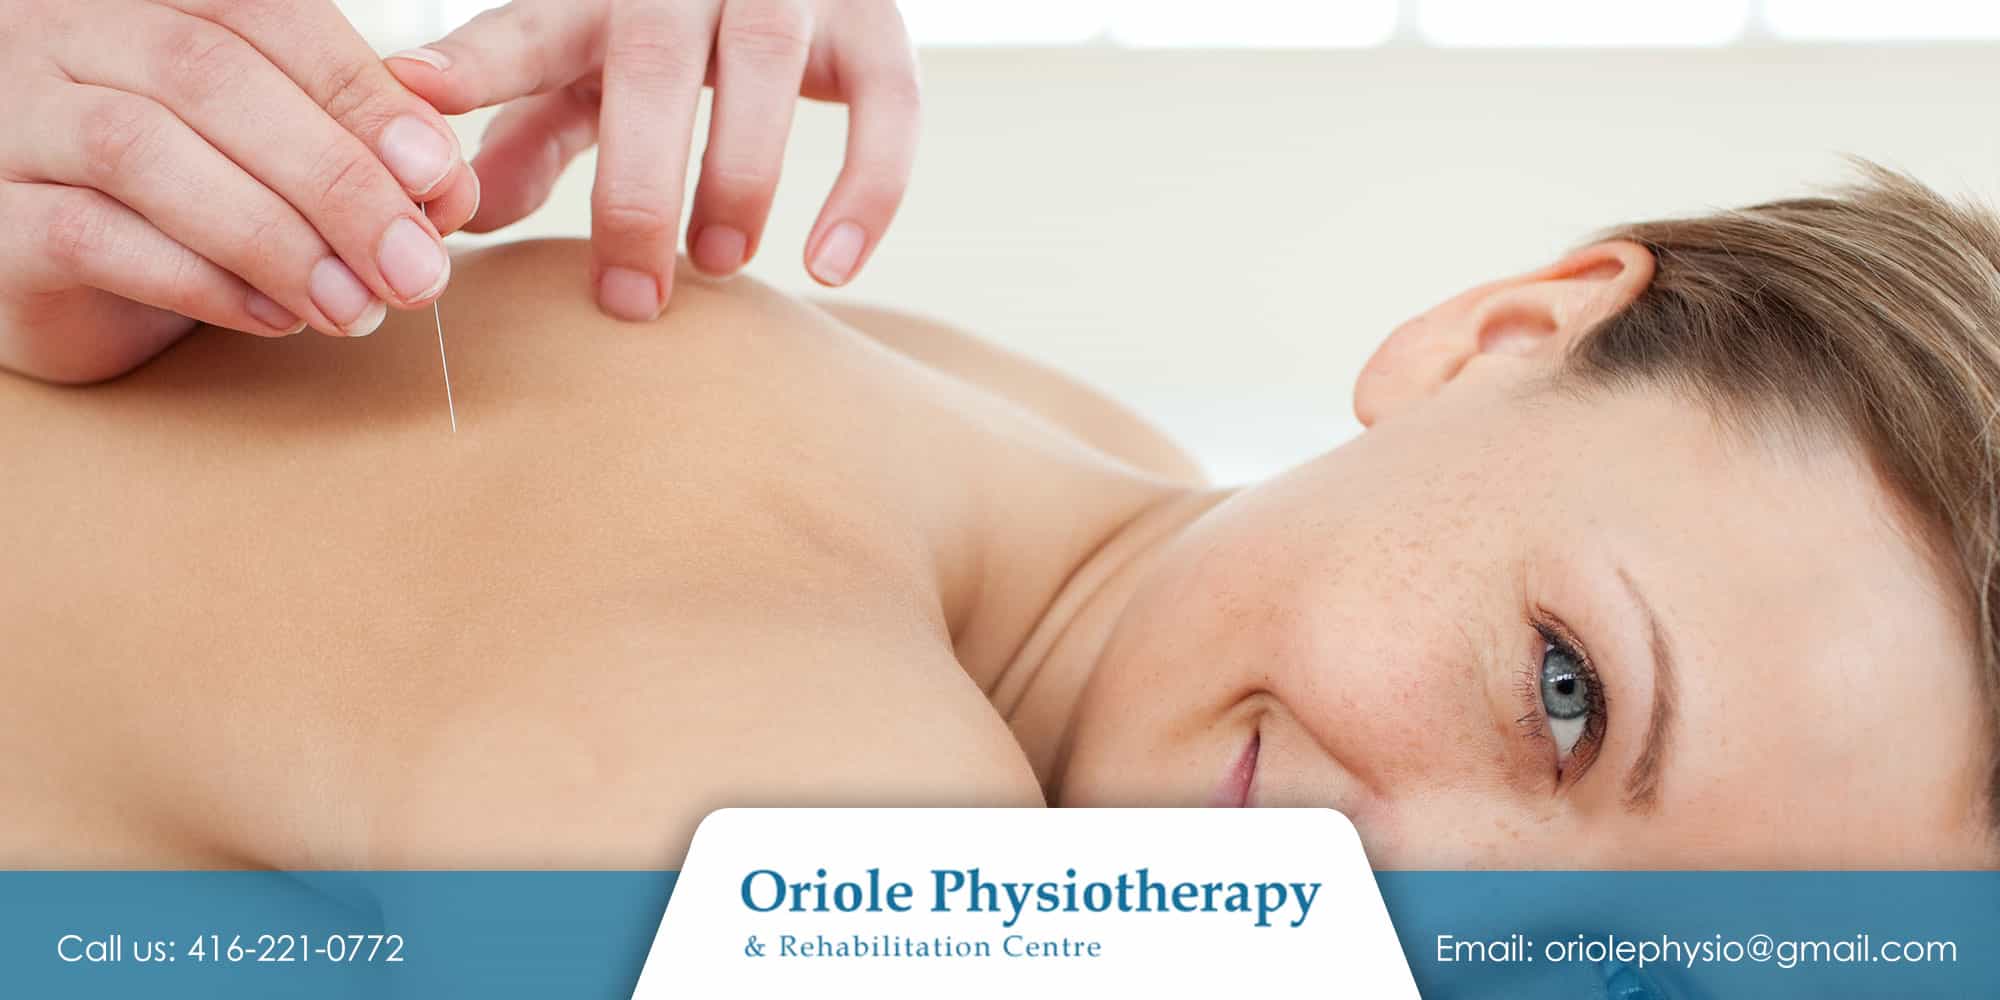 Oriole Physiotherapy and Rehabilitation Centre1 717